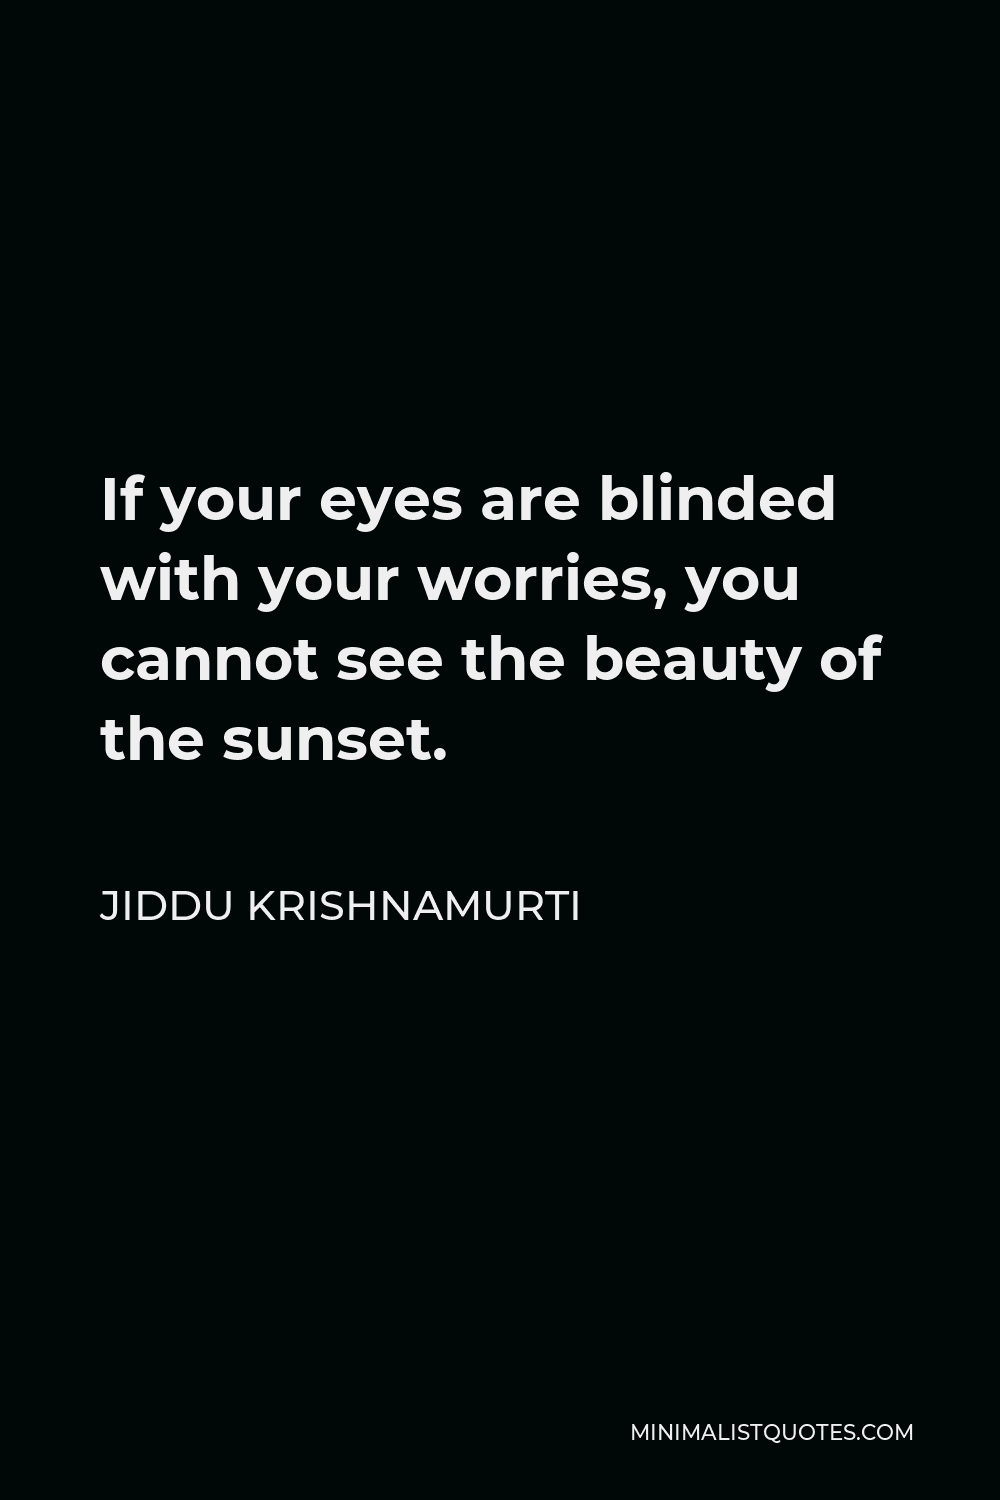 Jiddu Krishnamurti Quote - If your eyes are blinded with your worries, you cannot see the beauty of the sunset.